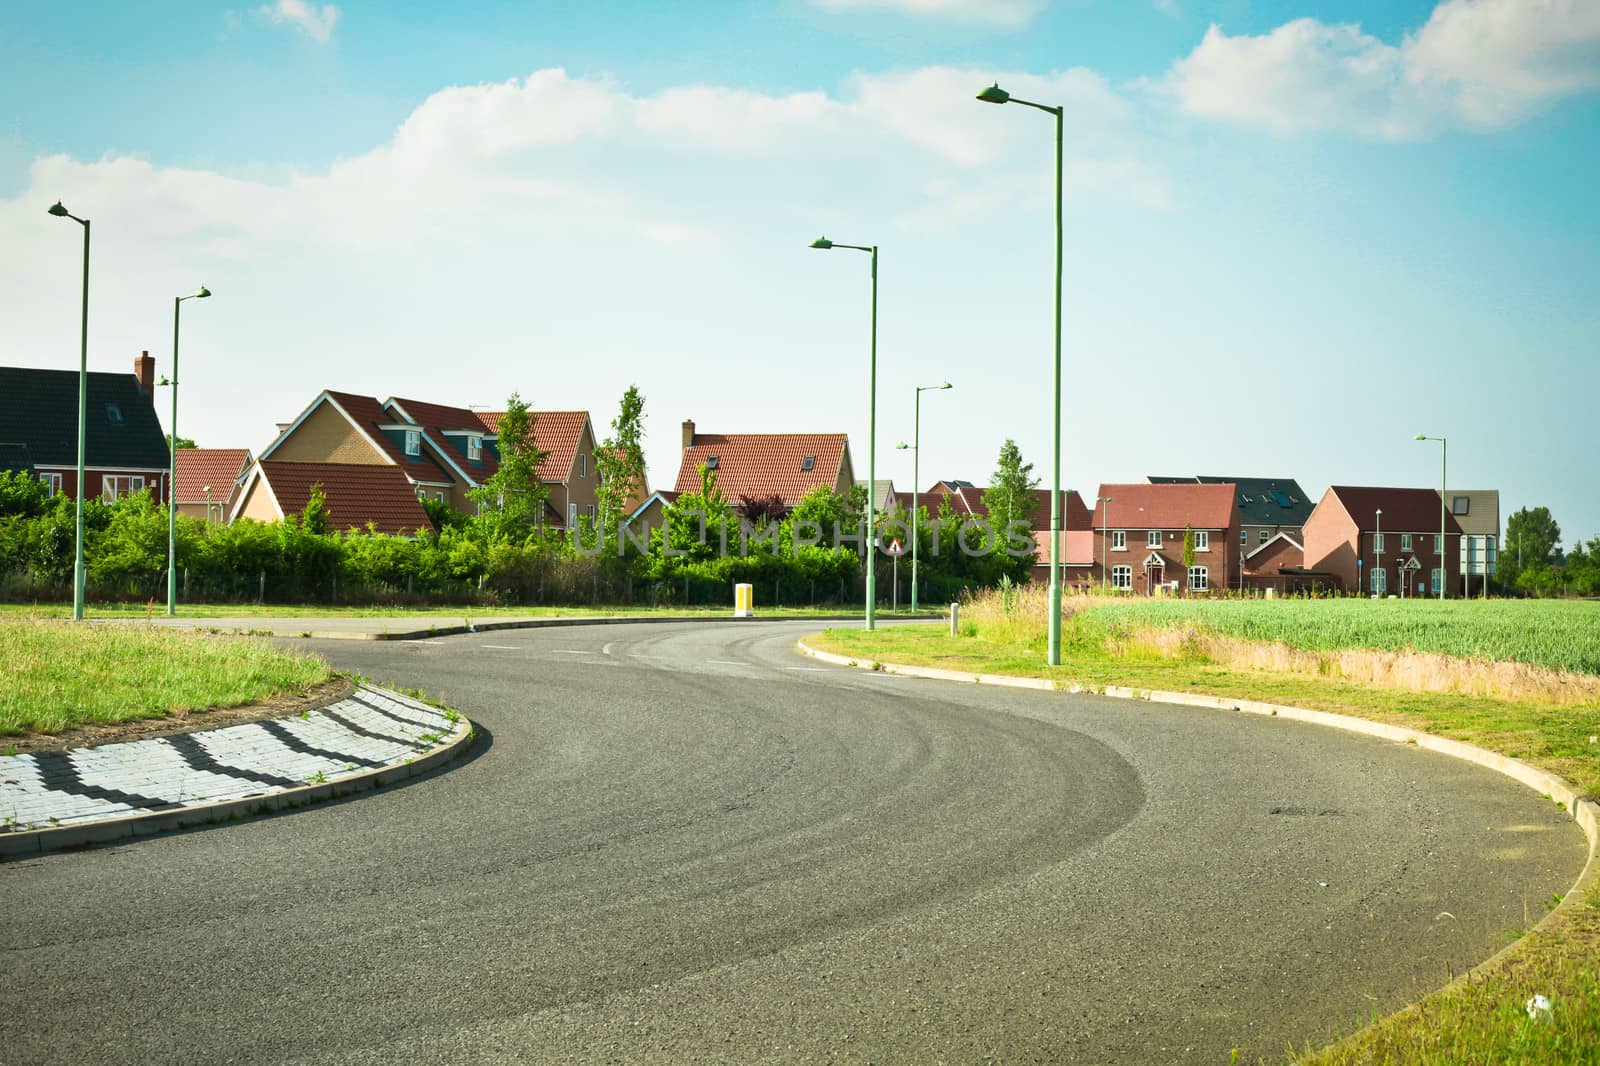 Modern road and roundabout in rural England